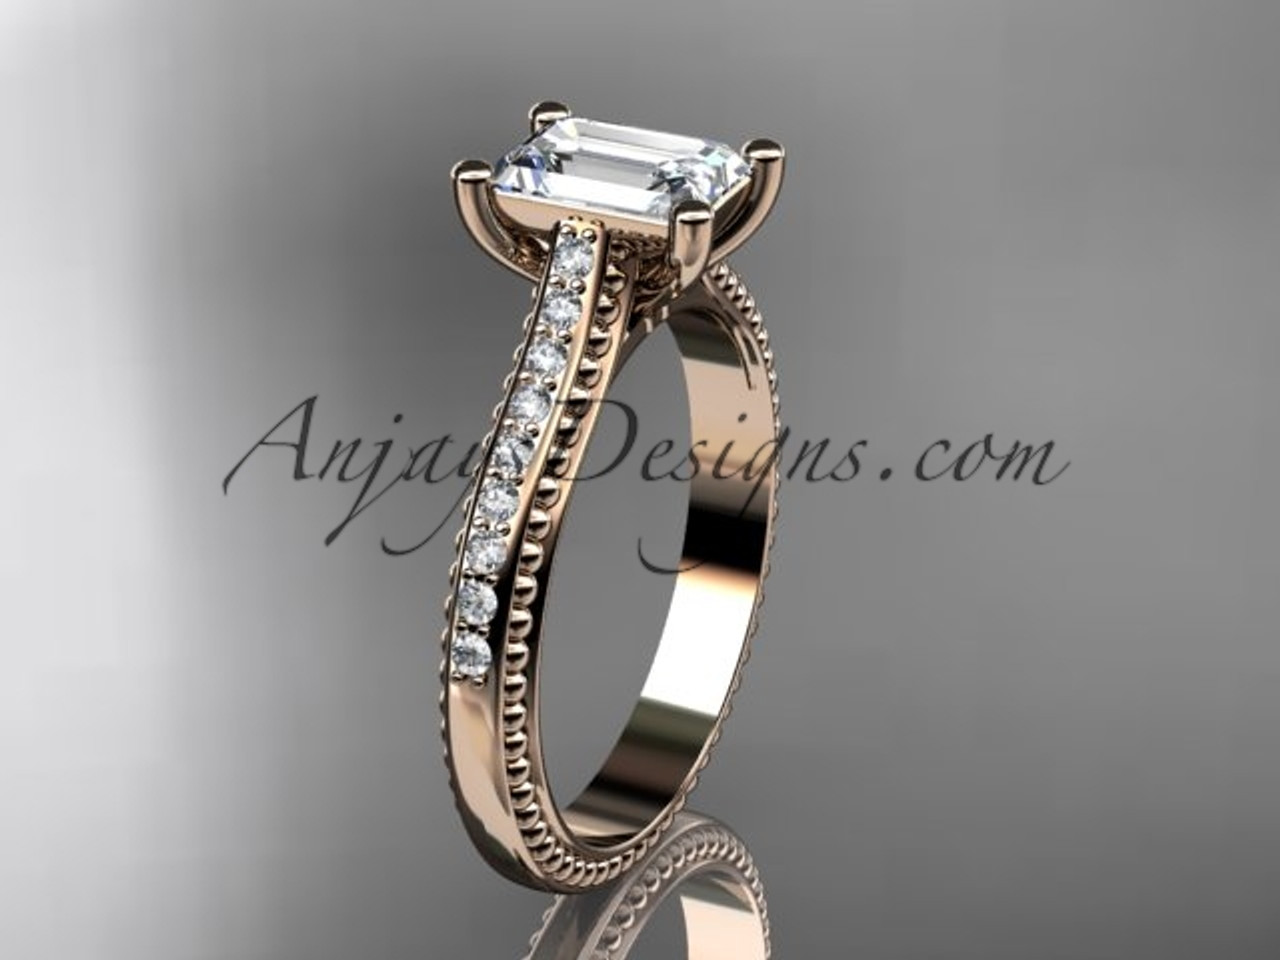 CARTIER】Cartier classic wedding ring series pays the highest respect to love